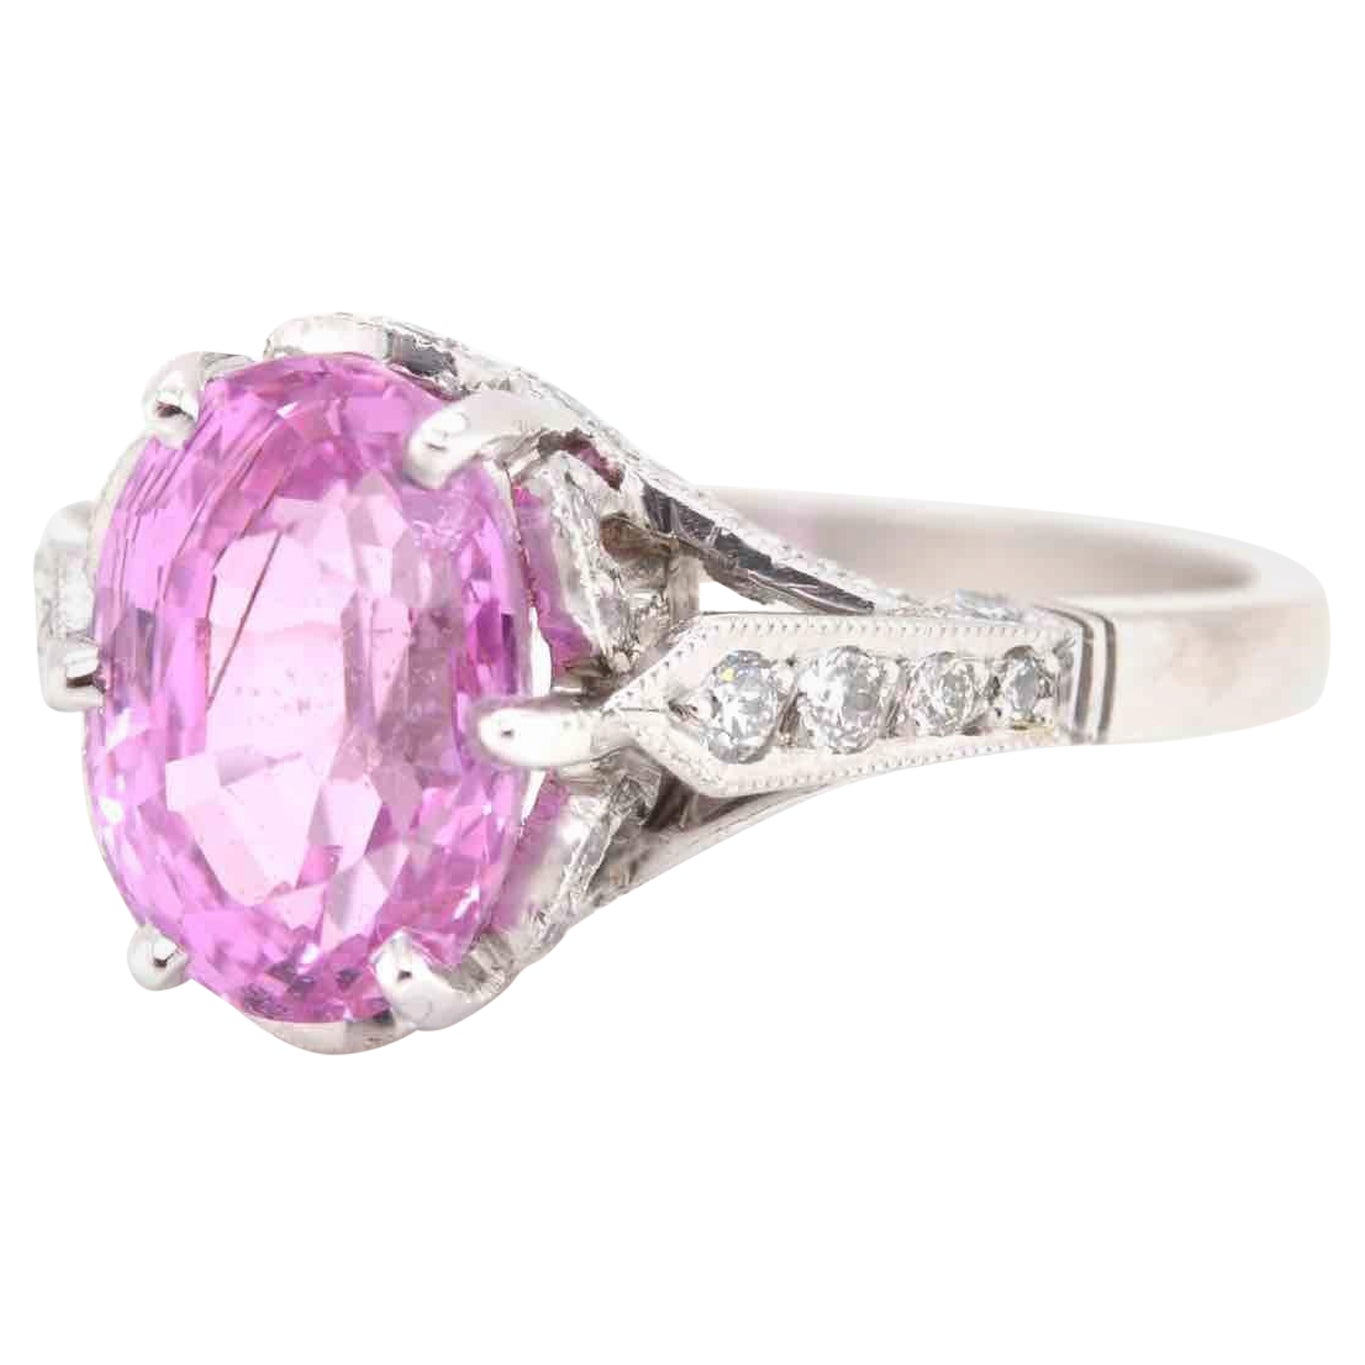  3.73 carats pink sapphire and diamonds ring For Sale